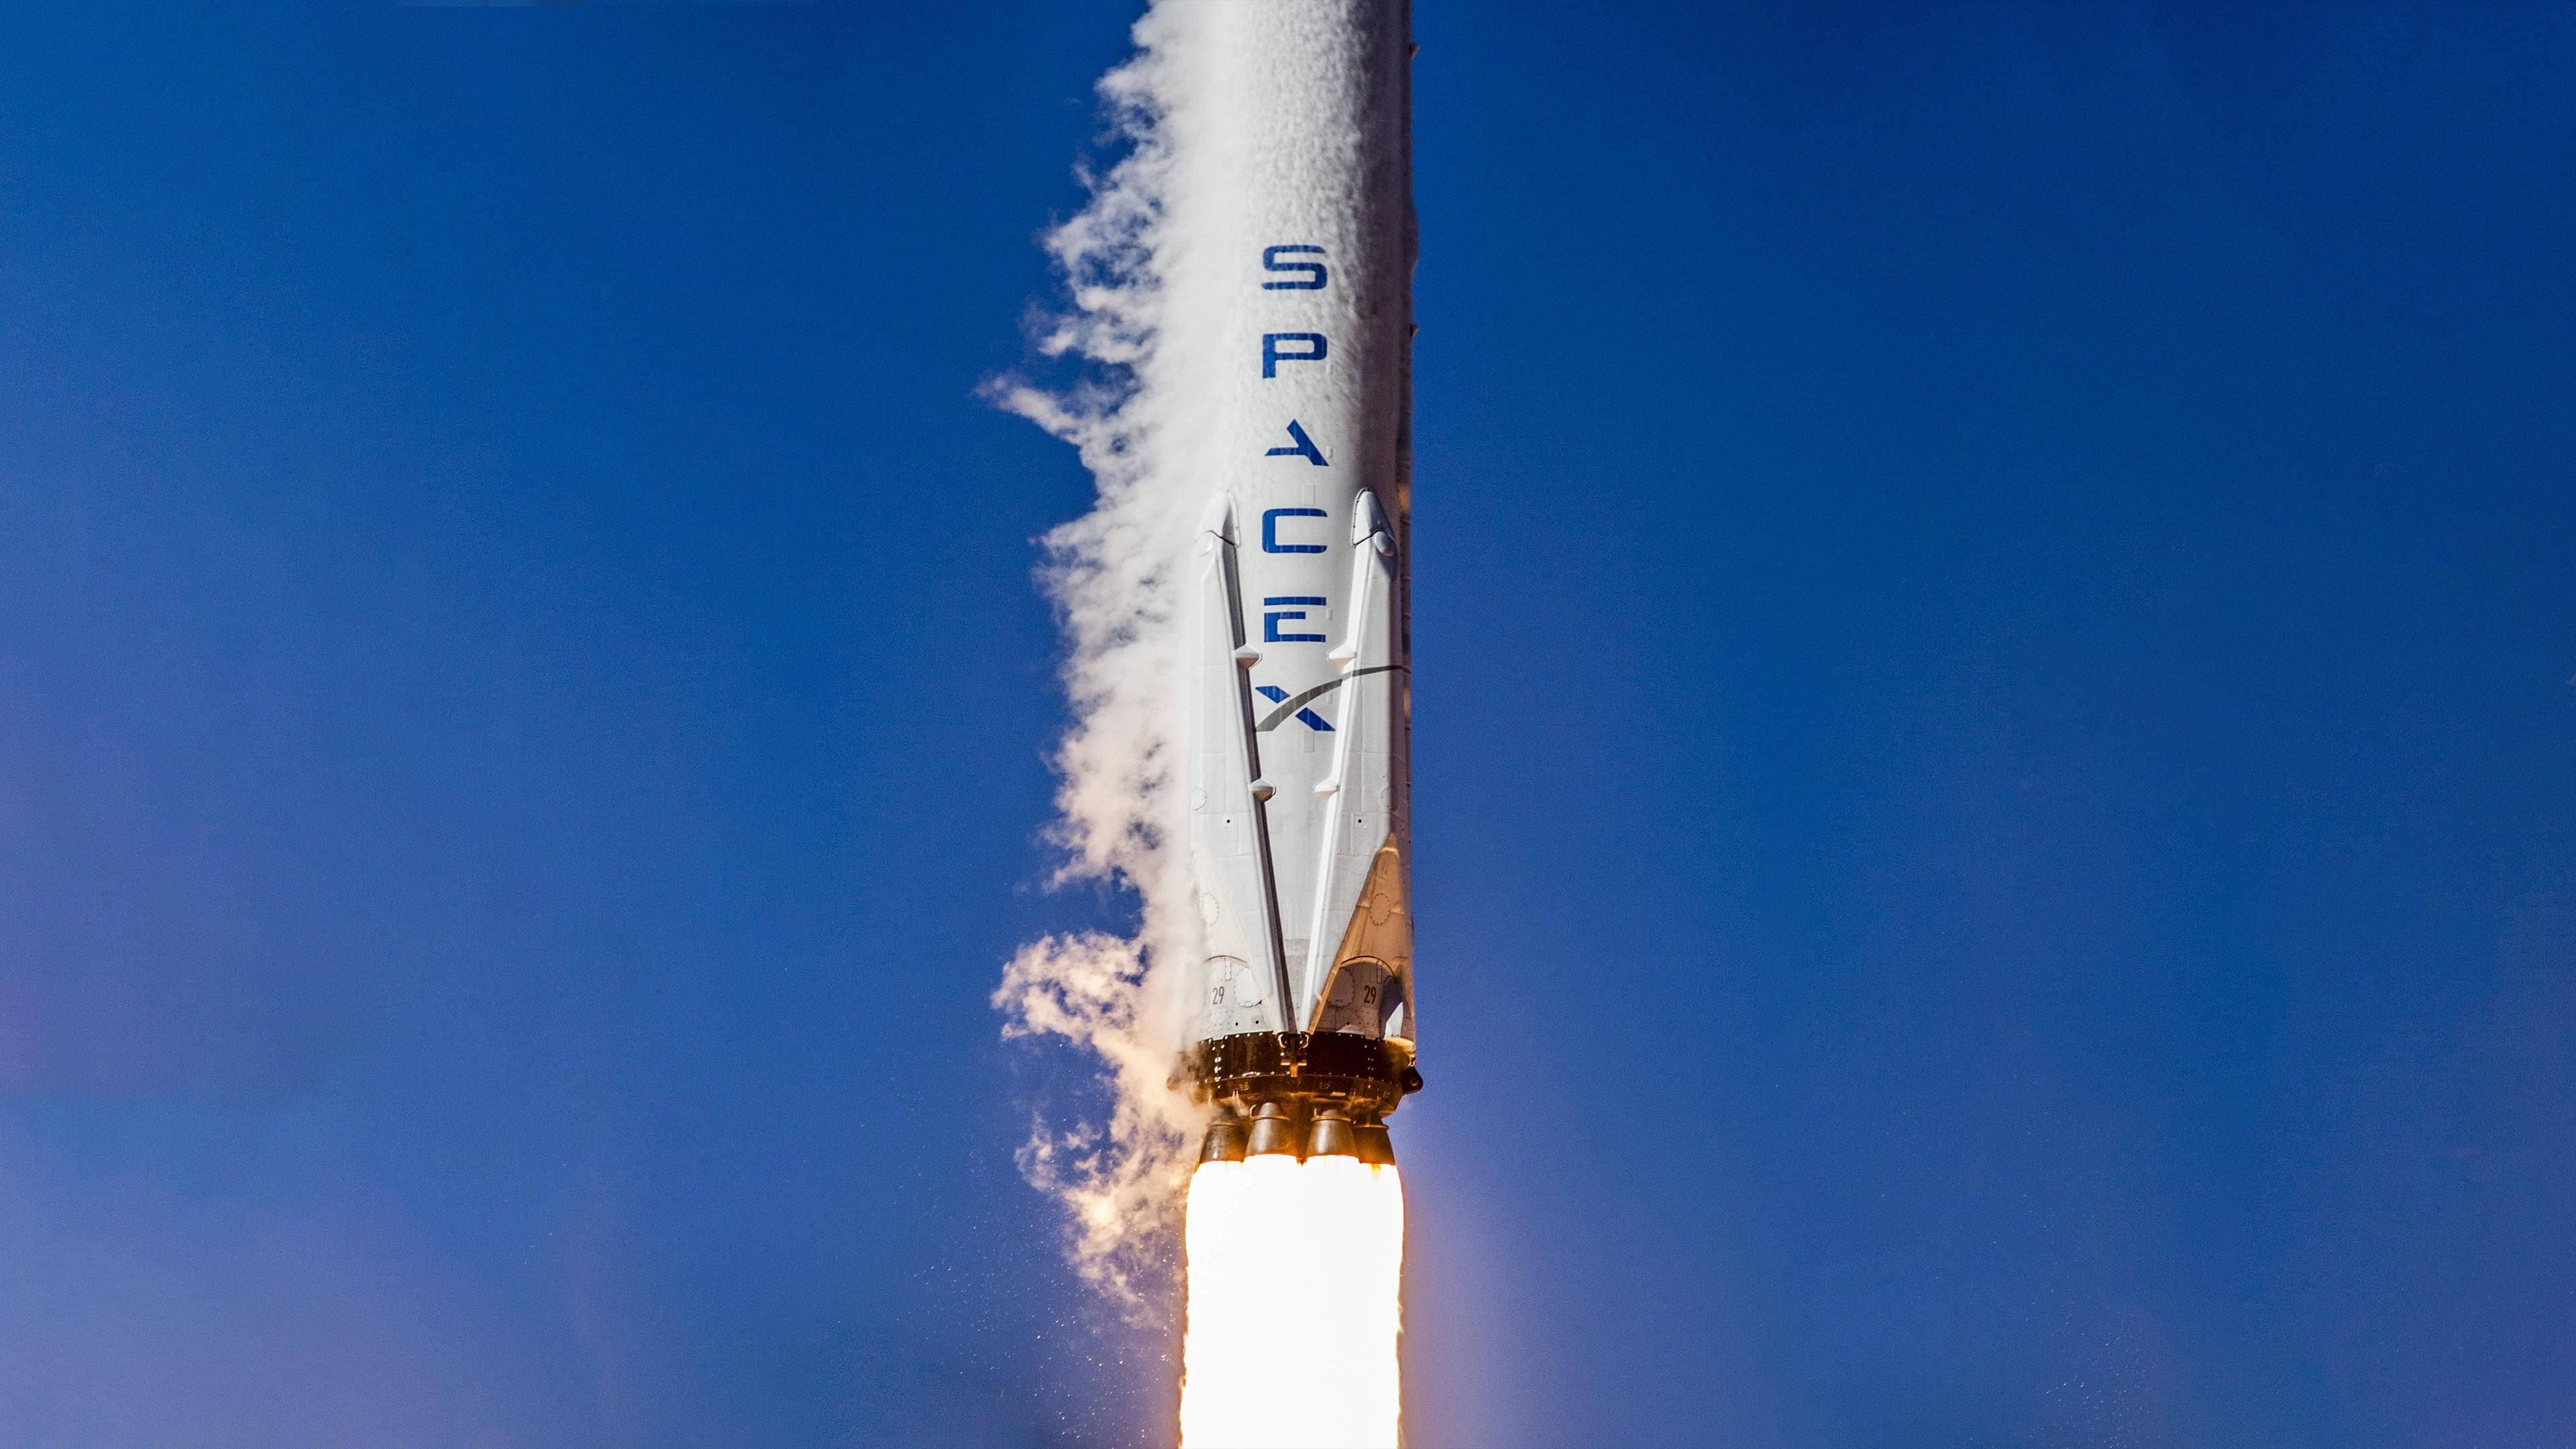 Download SpaceX Falcon 9 Take Off Wallpaper | Wallpapers.com